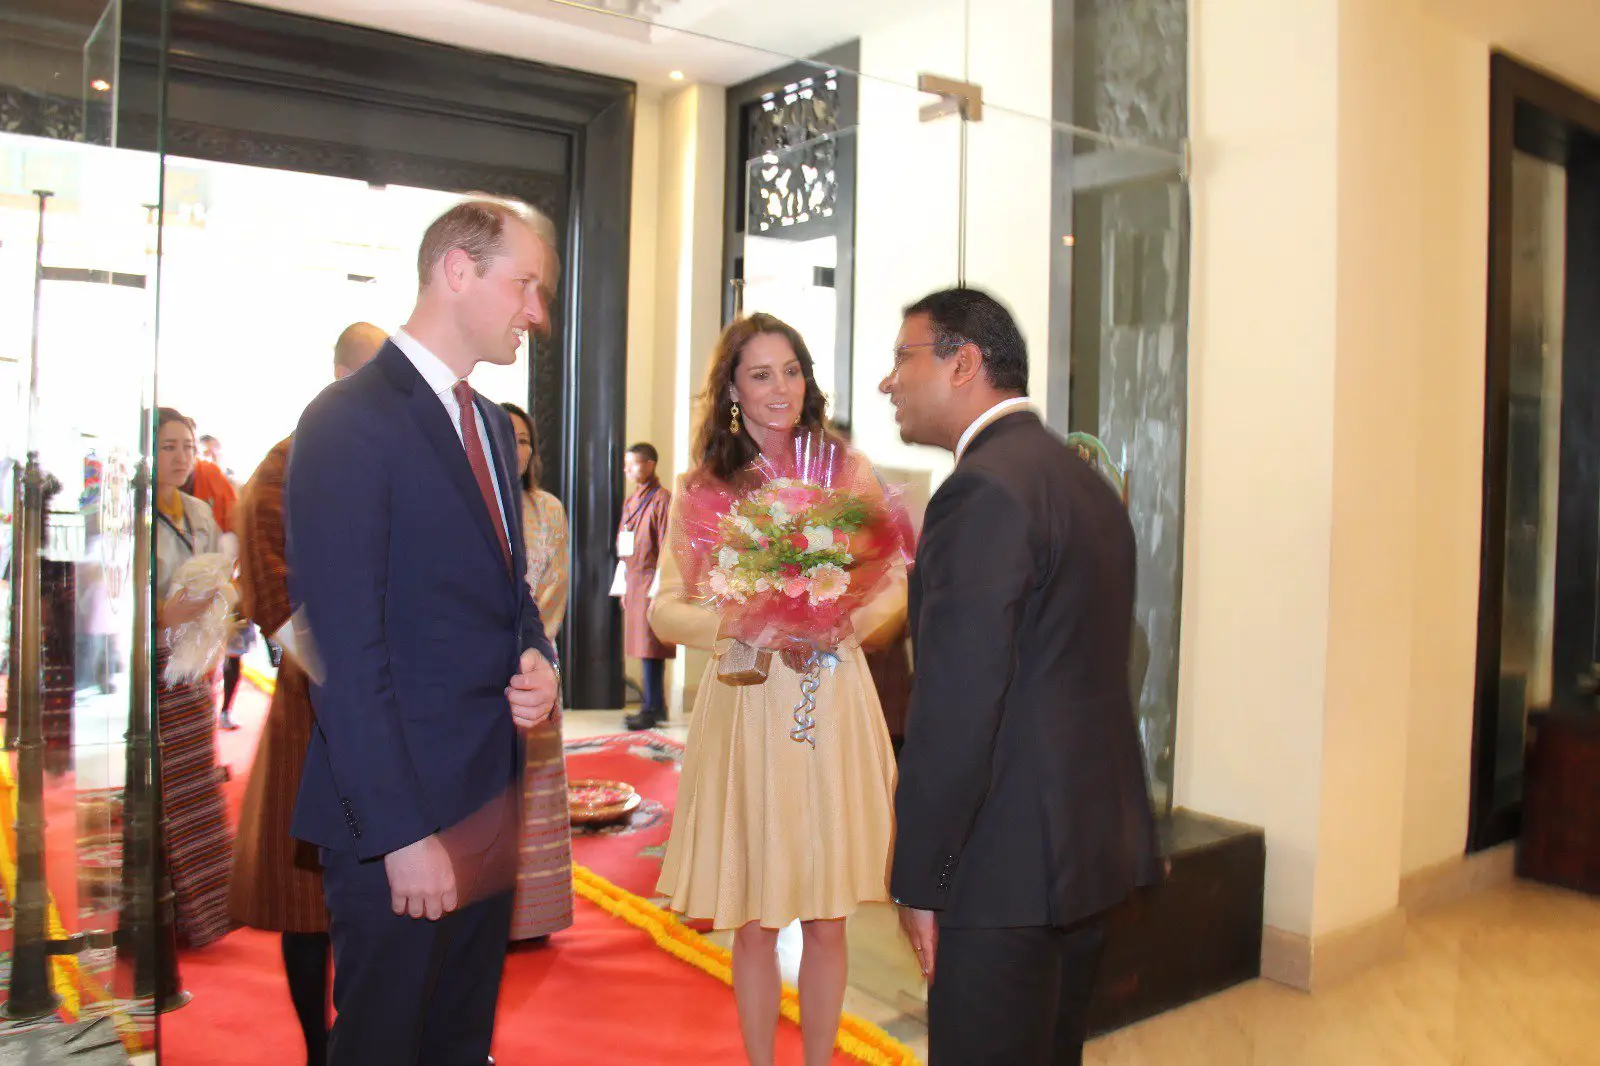 The Duke and Duchess of Cambridge arrived in Bhutan for Royal Tour